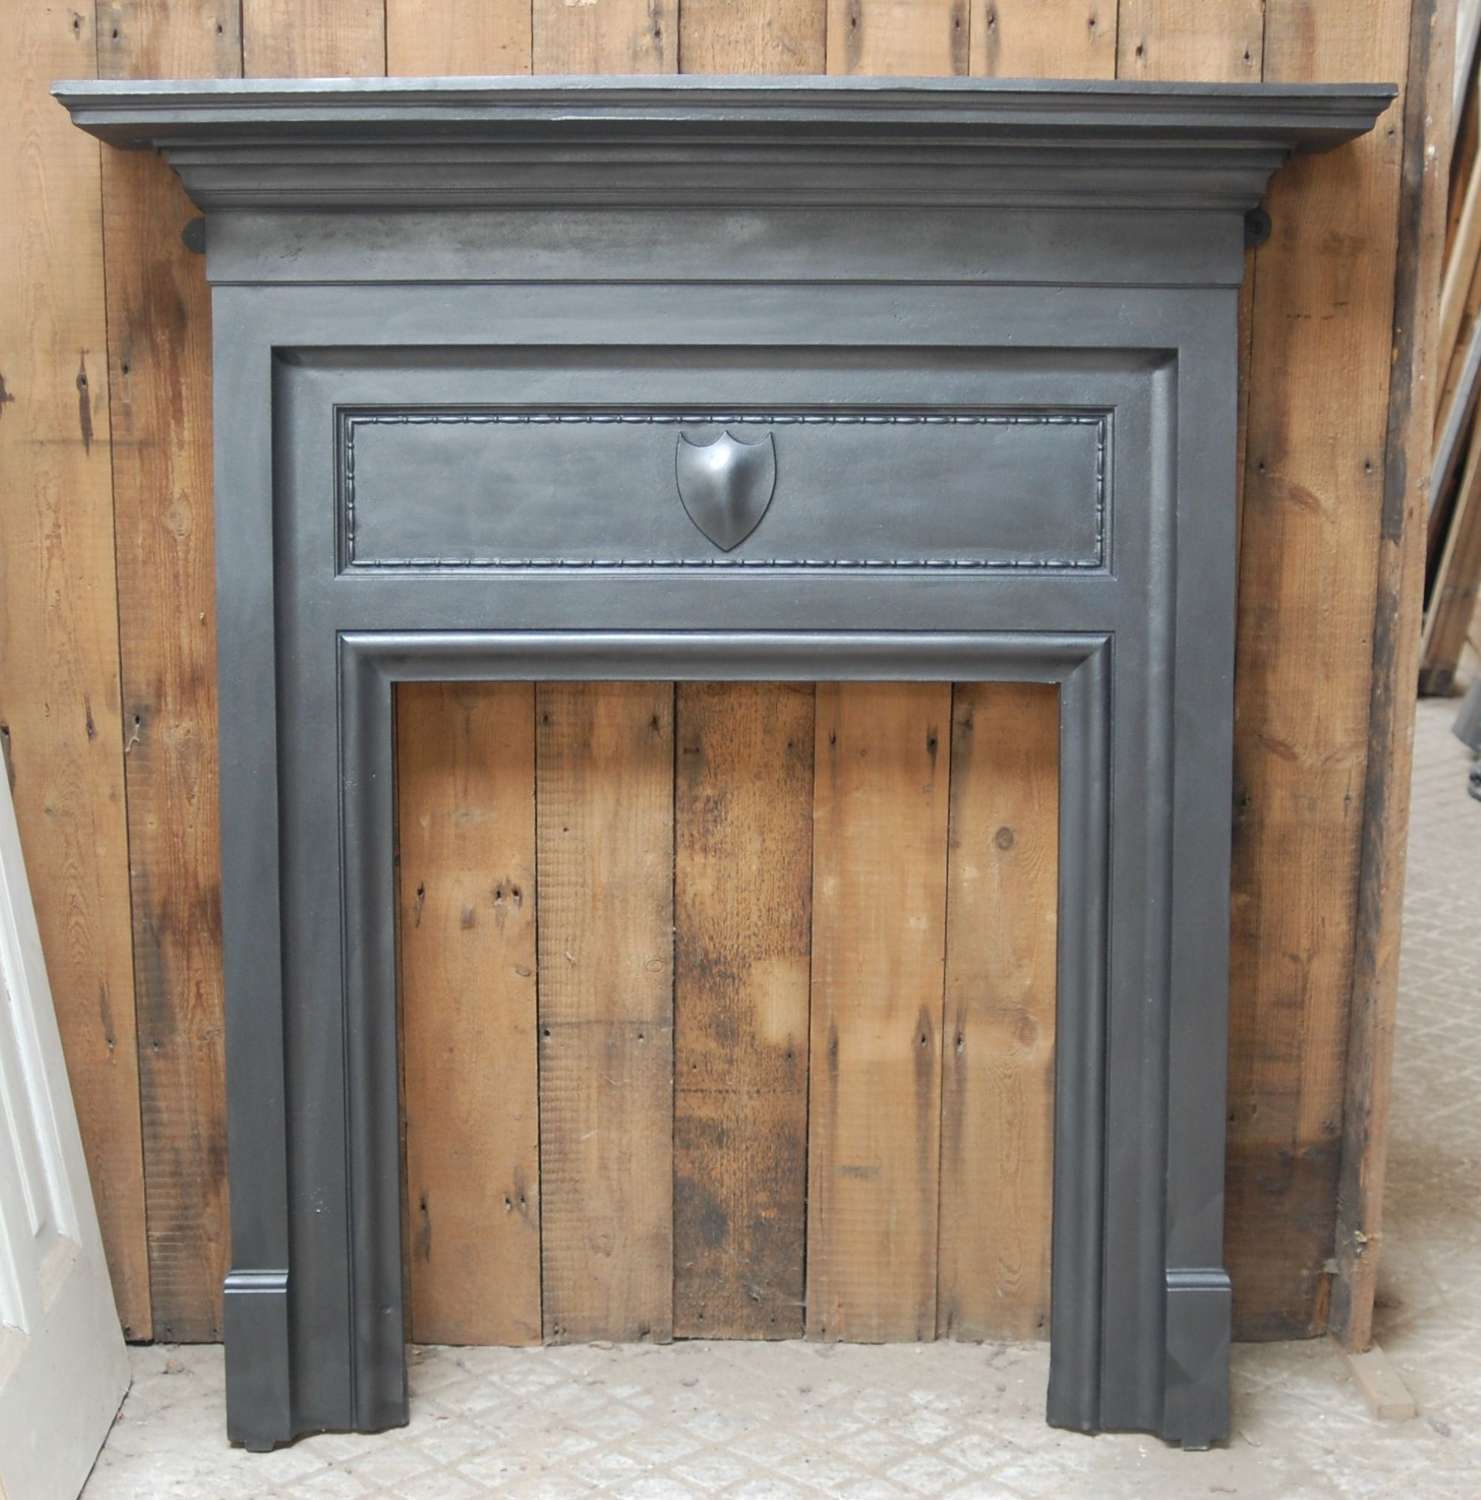 FS0115 A RECLAIMED EDWARDIAN CAST IRON FIRE SURROUND FOR WOODBURNER